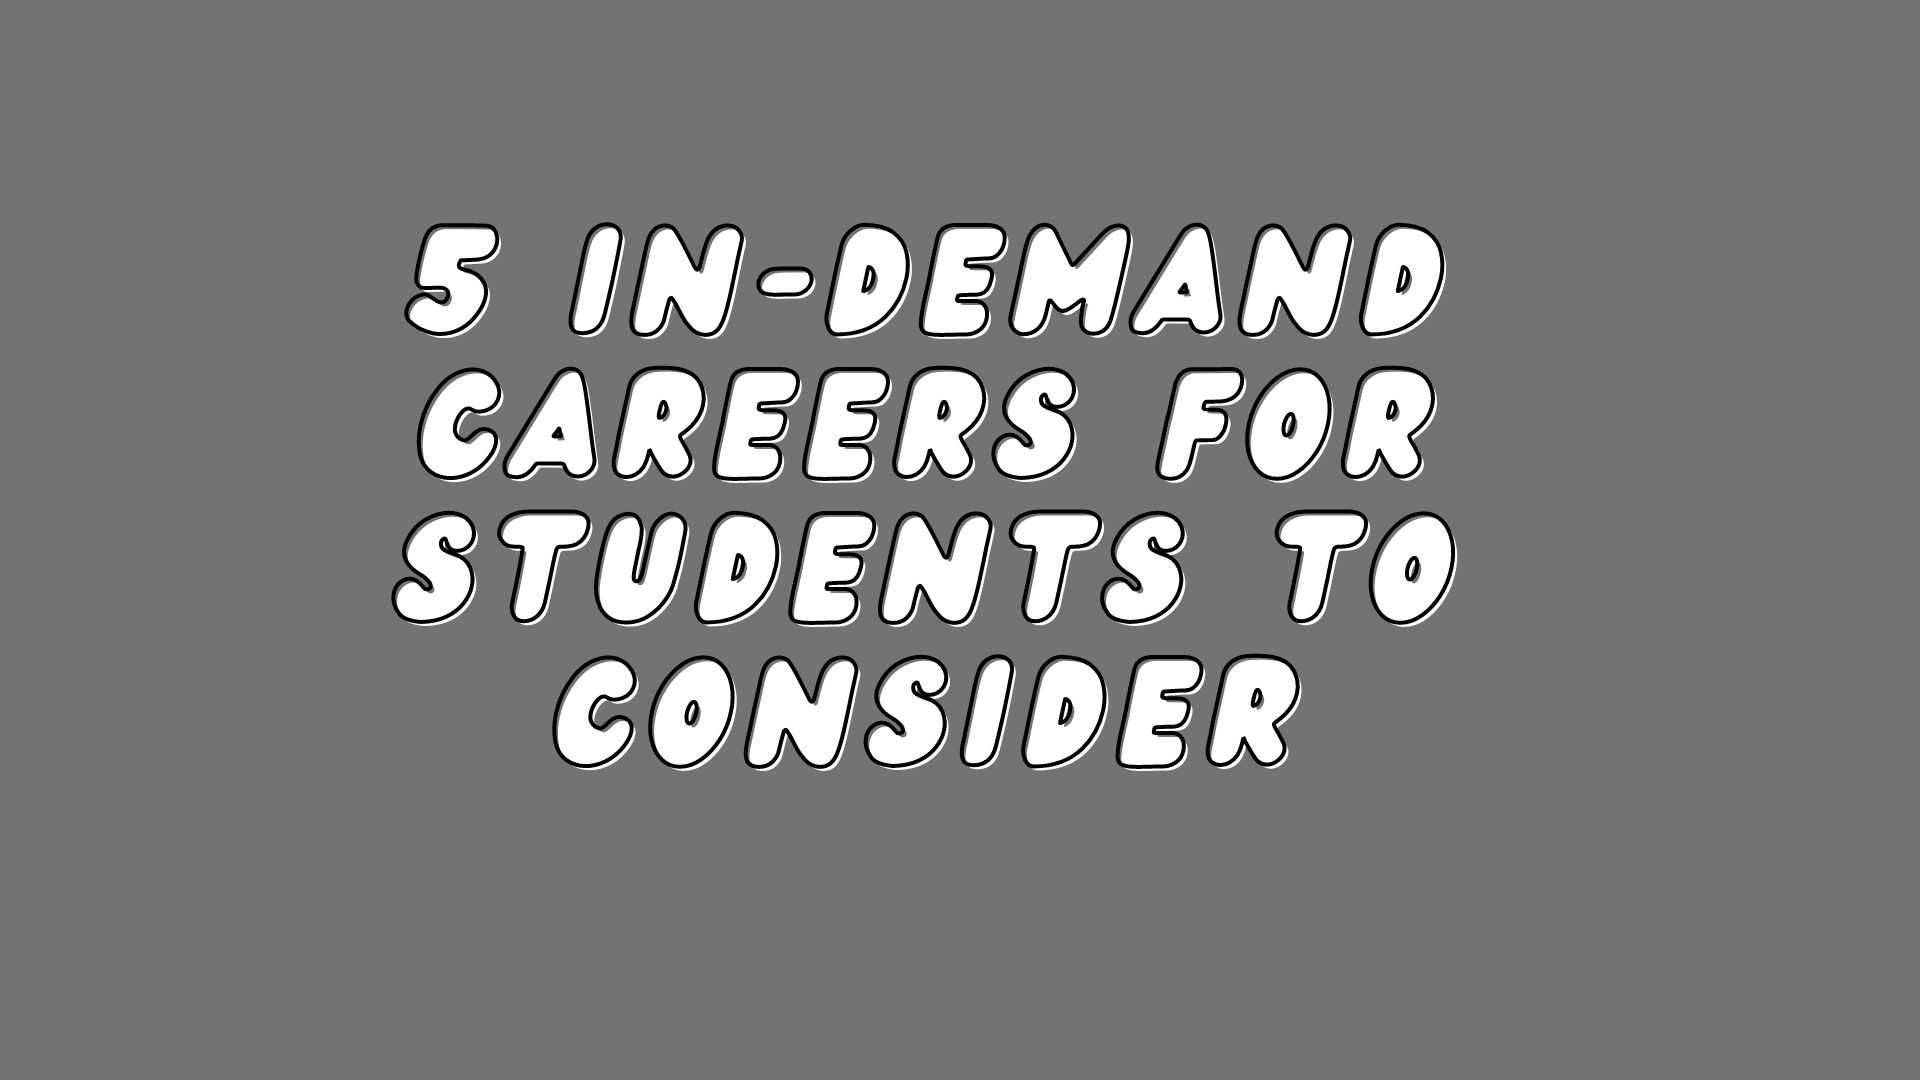 5 In-Demand Careers For Students To Consider